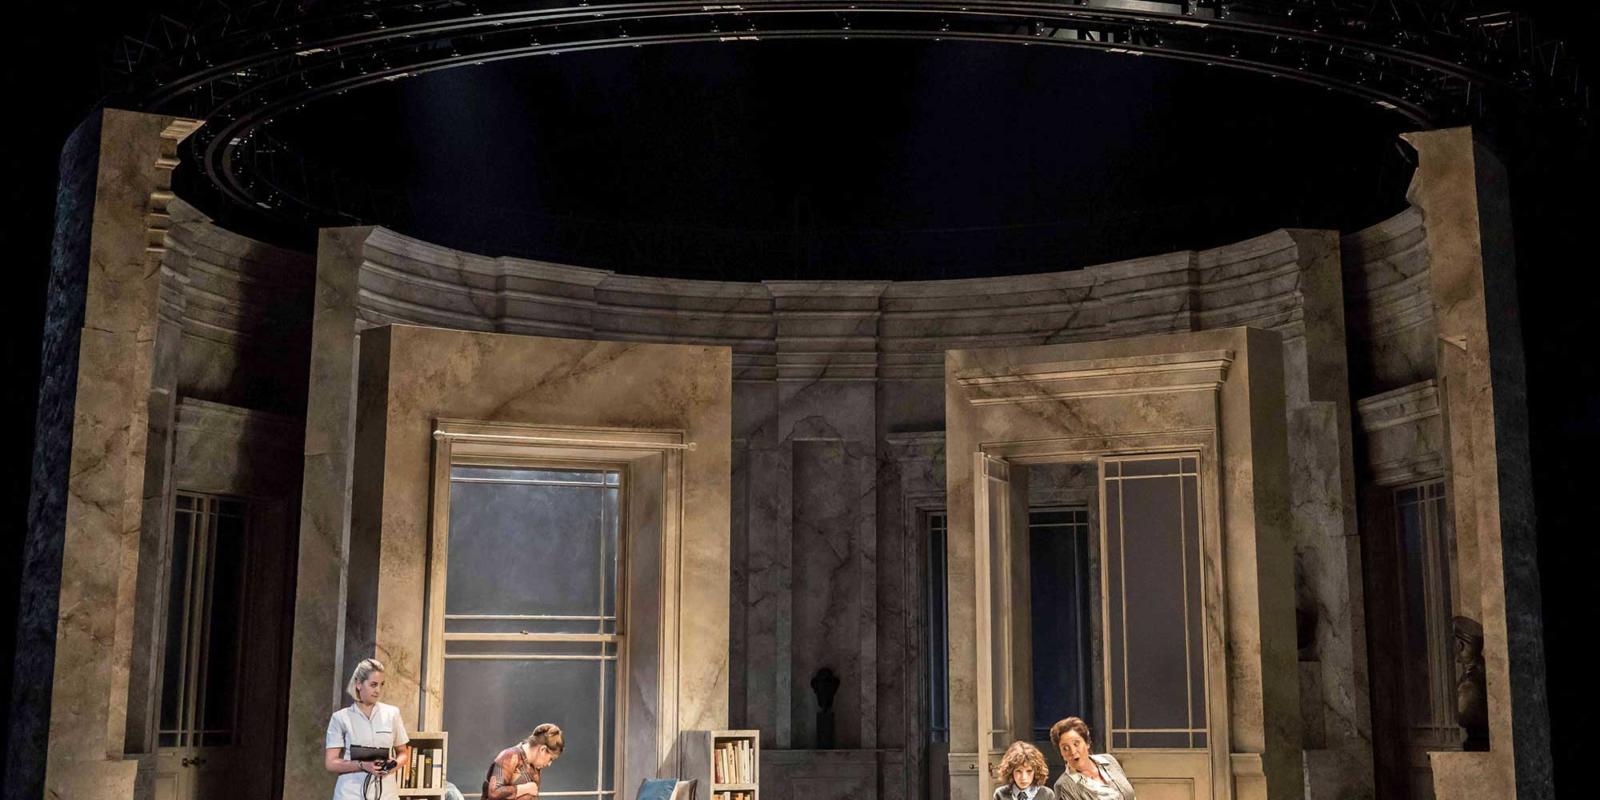 Group of women in a large circular room in ENO's The Winter's Tale